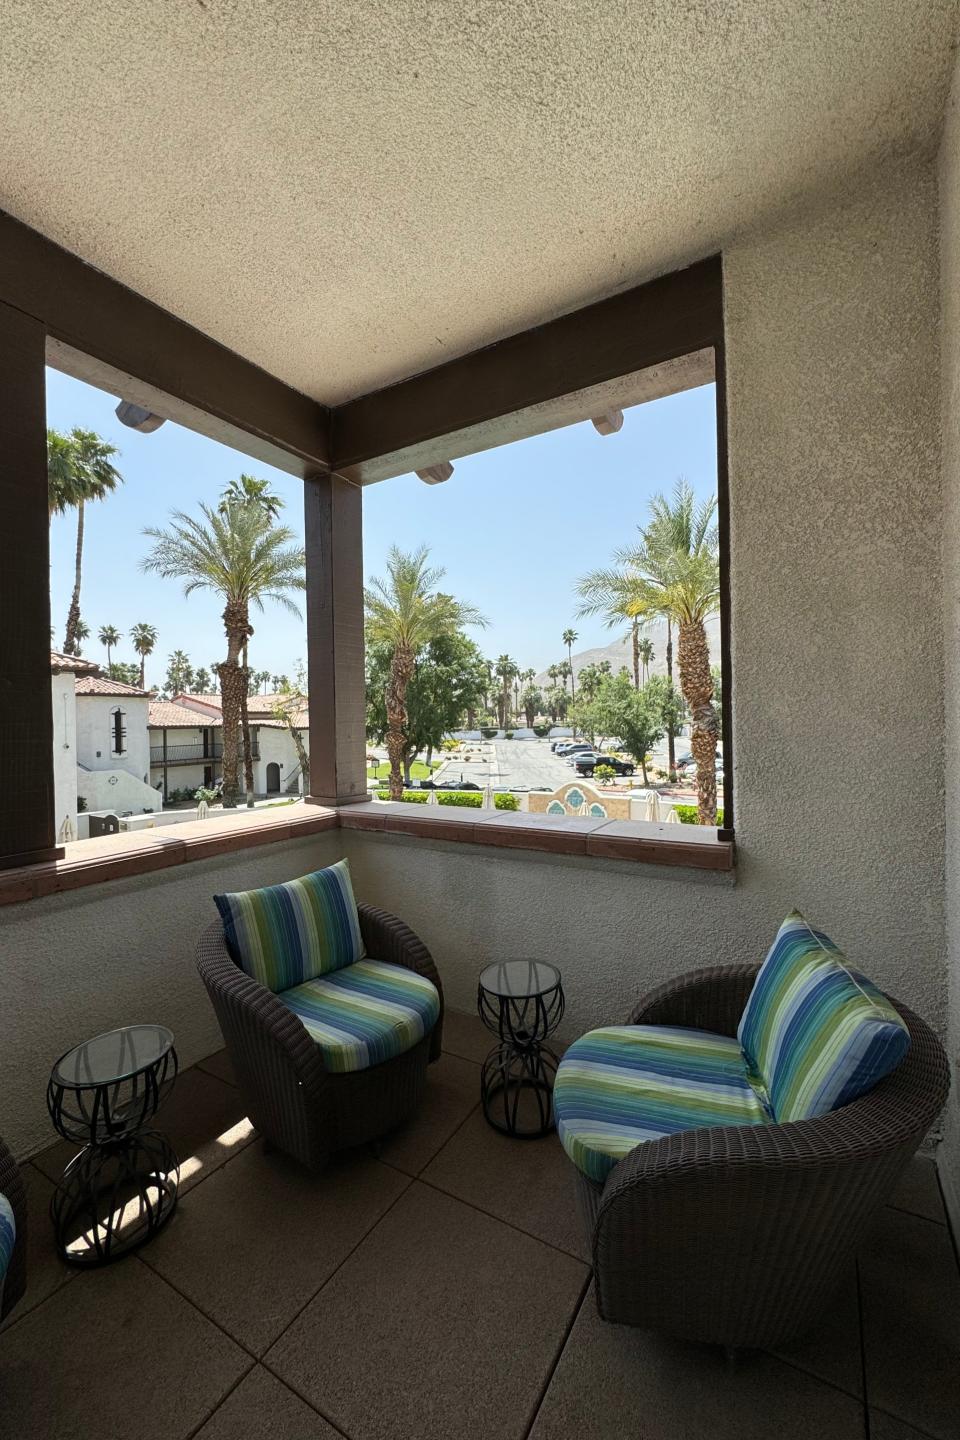 View from a covered patio with casual seating overlooking a sunny street lined with palm trees